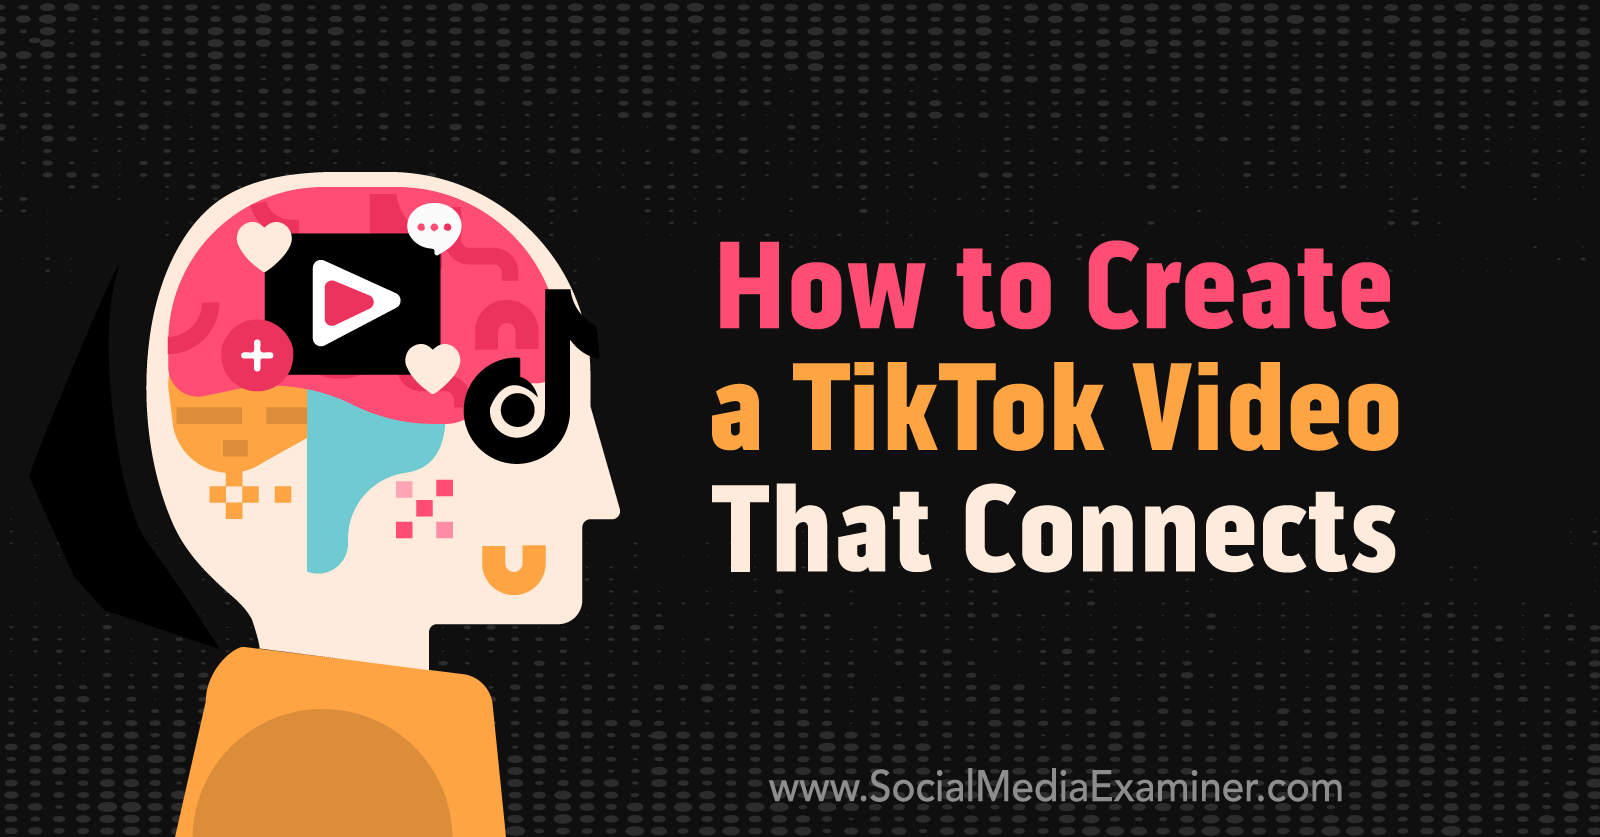 How to Create a TikTok Video That Connects featuring insights from Giselle Ugarte on the Social Media Marketing Podcast.